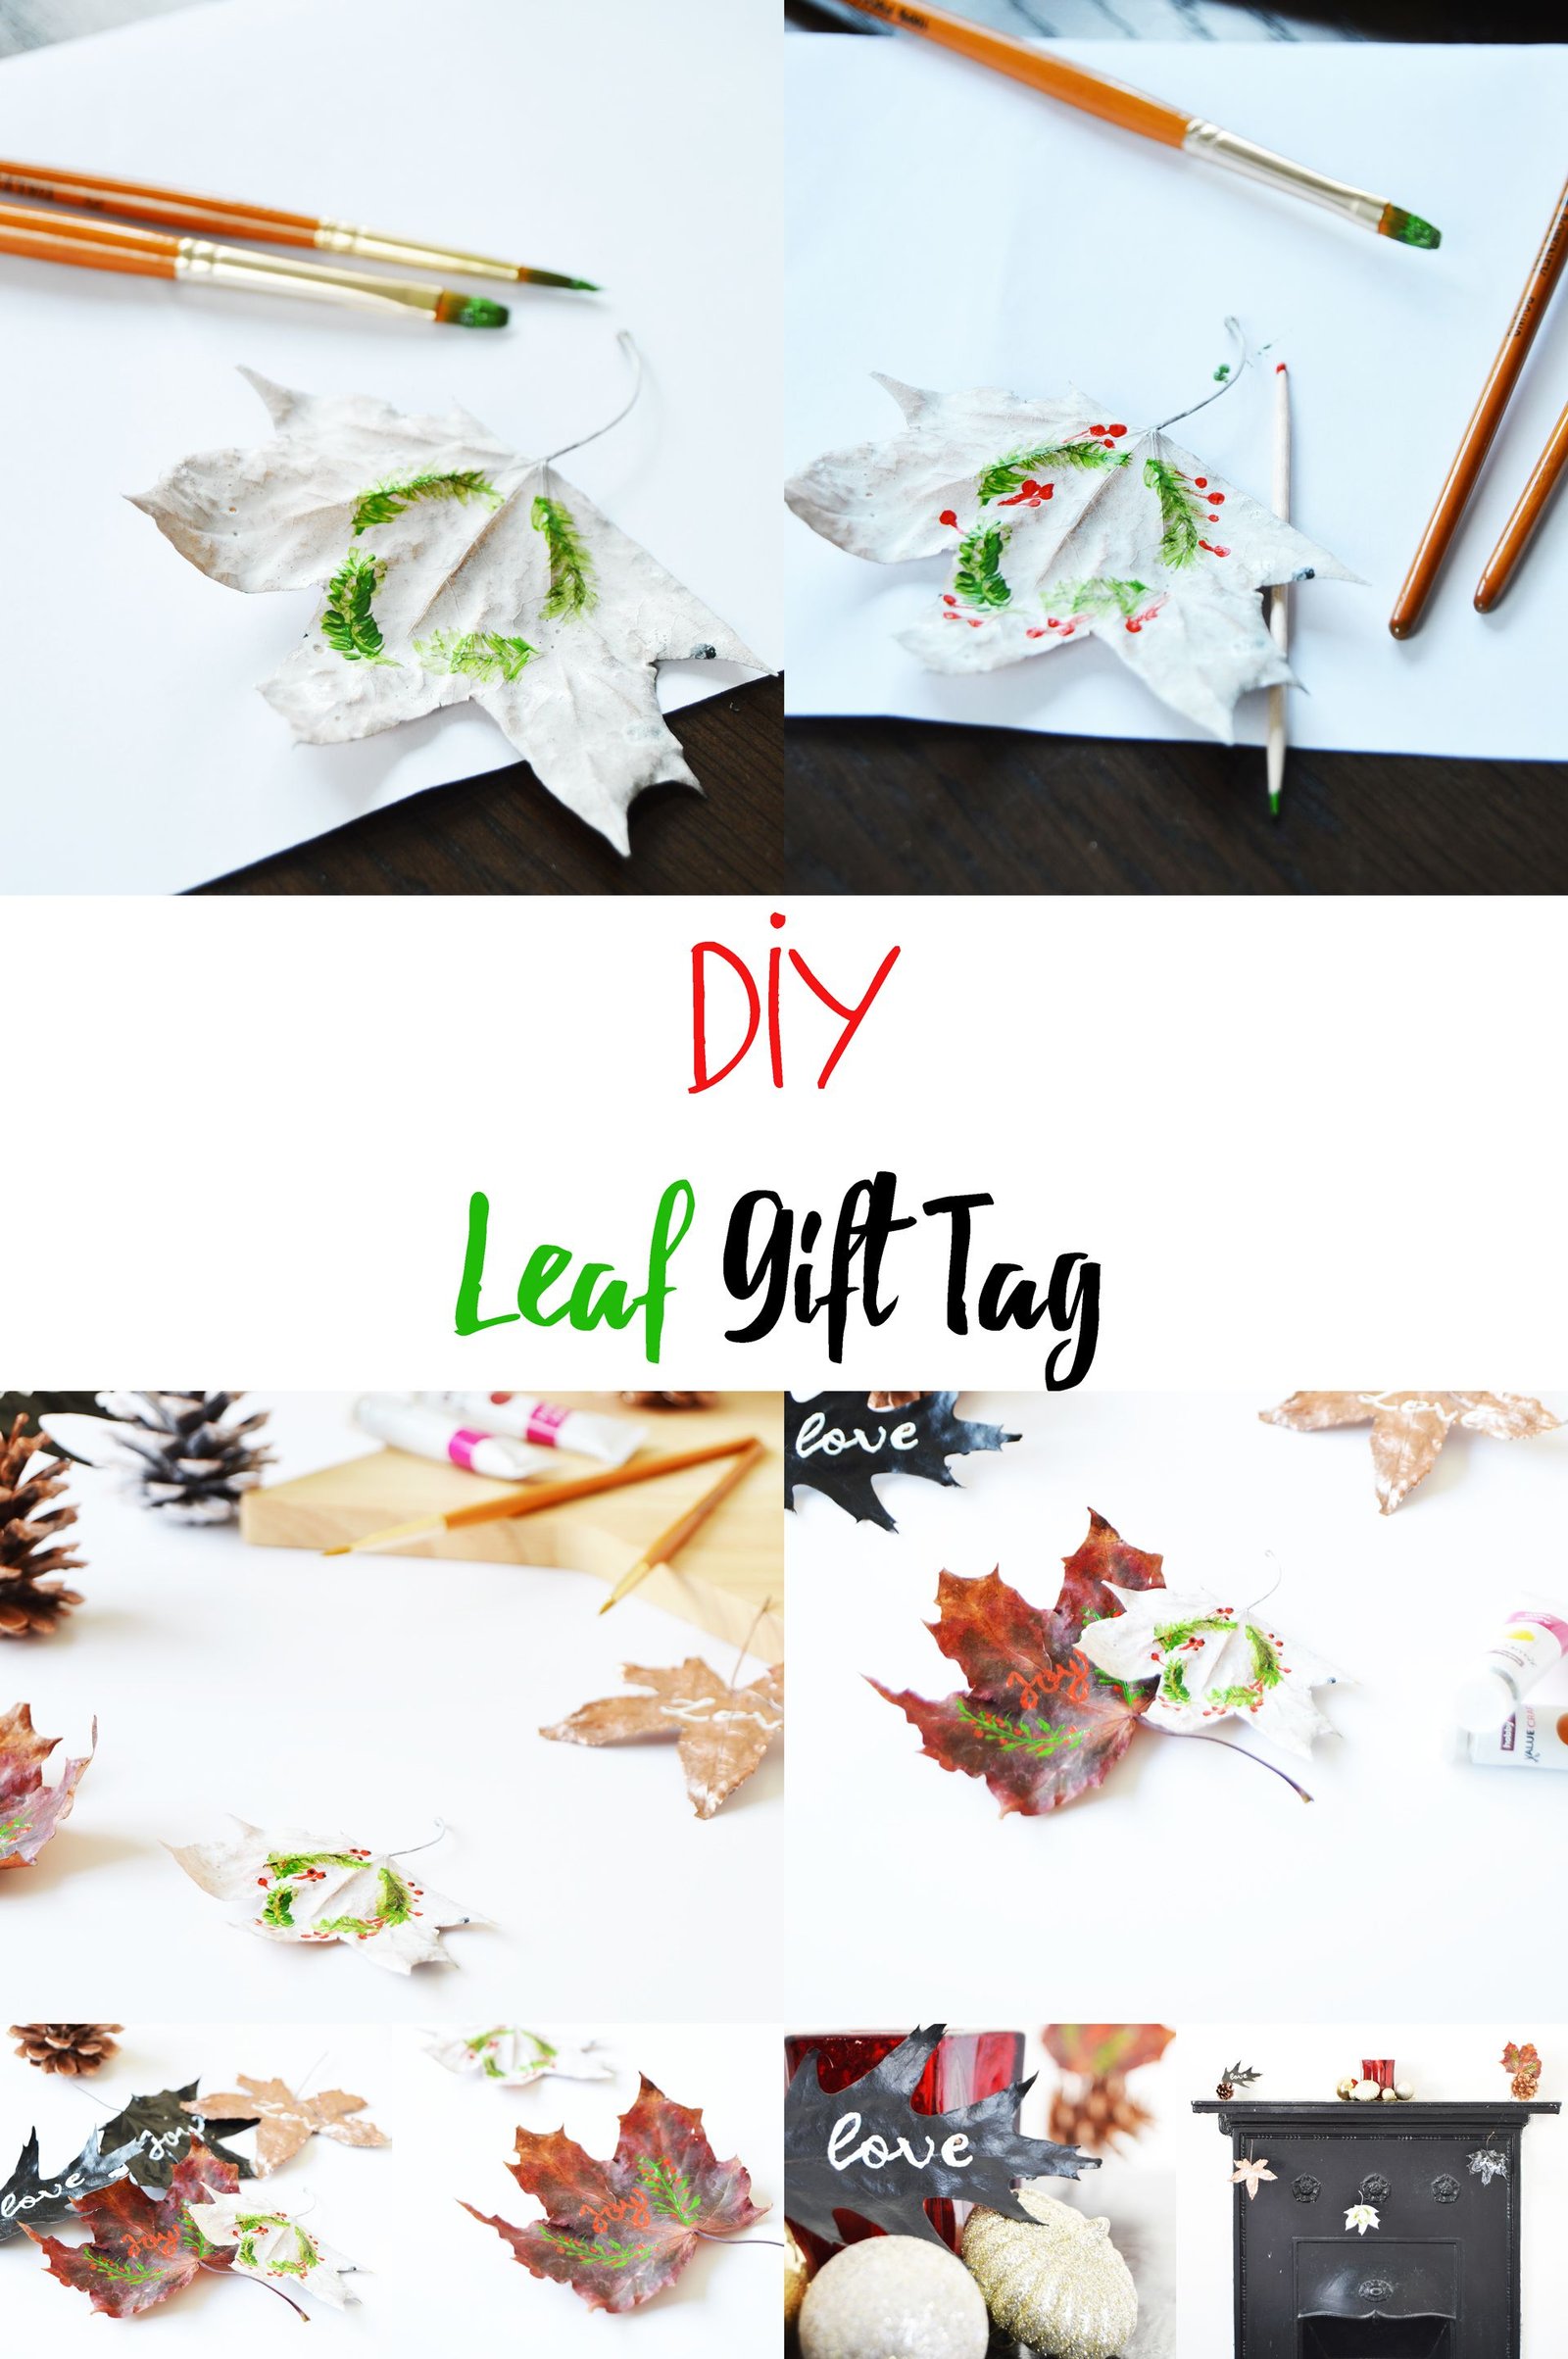 Why don't you make your gifts more personalised this year? Instead of using store bought gift tags, how about making your own gift tags with leaves? DIY Leaf gift tags are easy to make and it will make your gifts stand out.